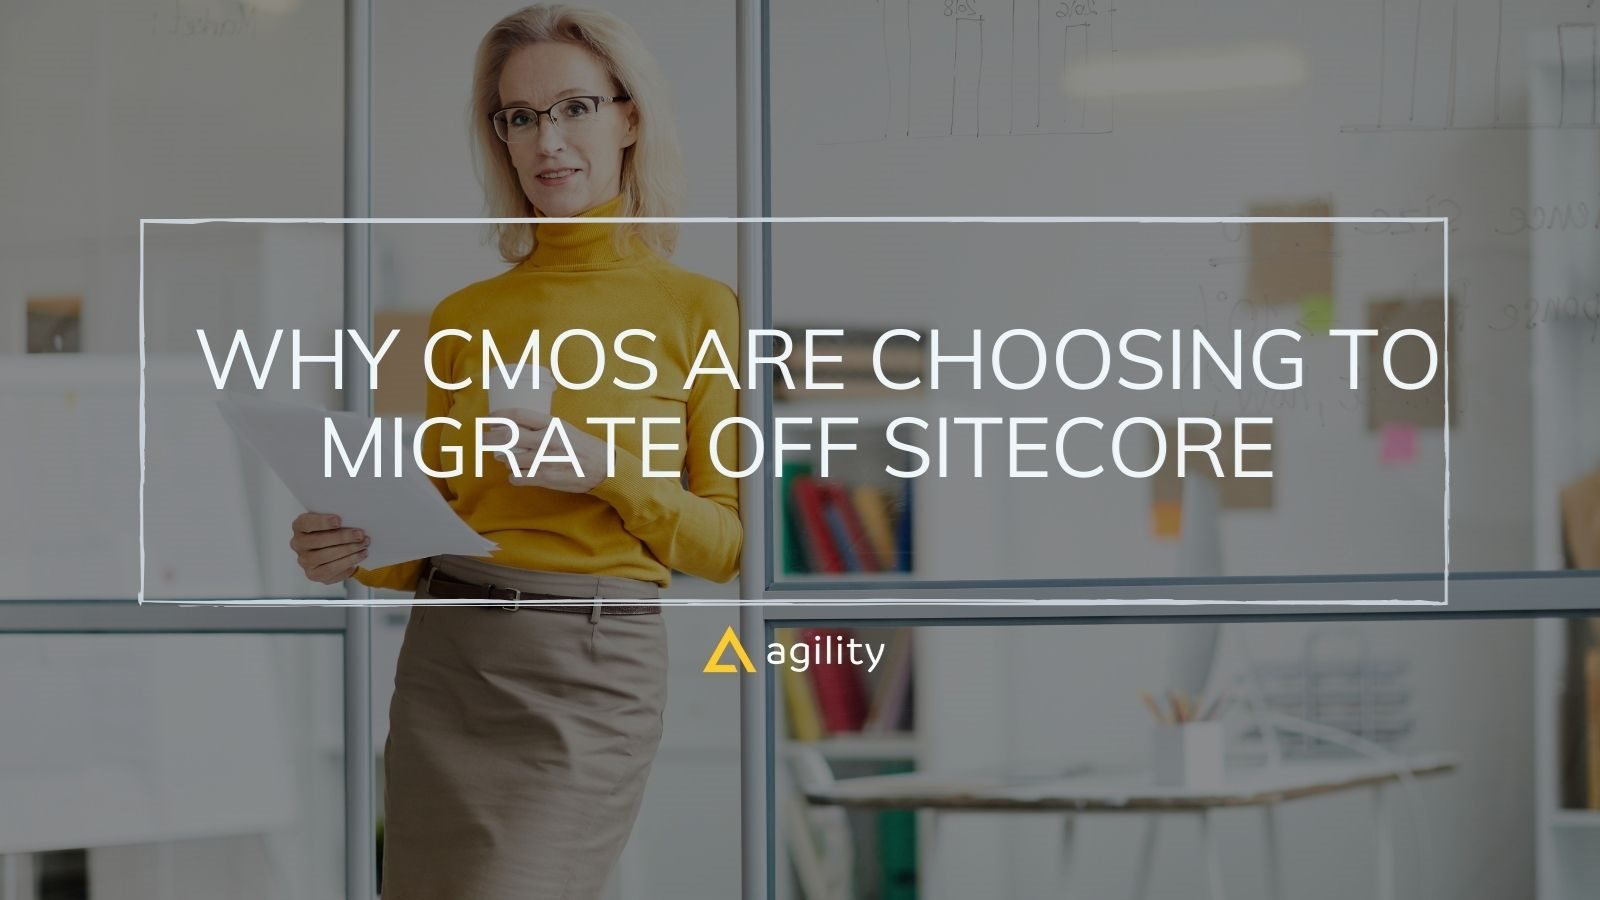 Why CMOs are Choosing to Migrate Off Sitecore